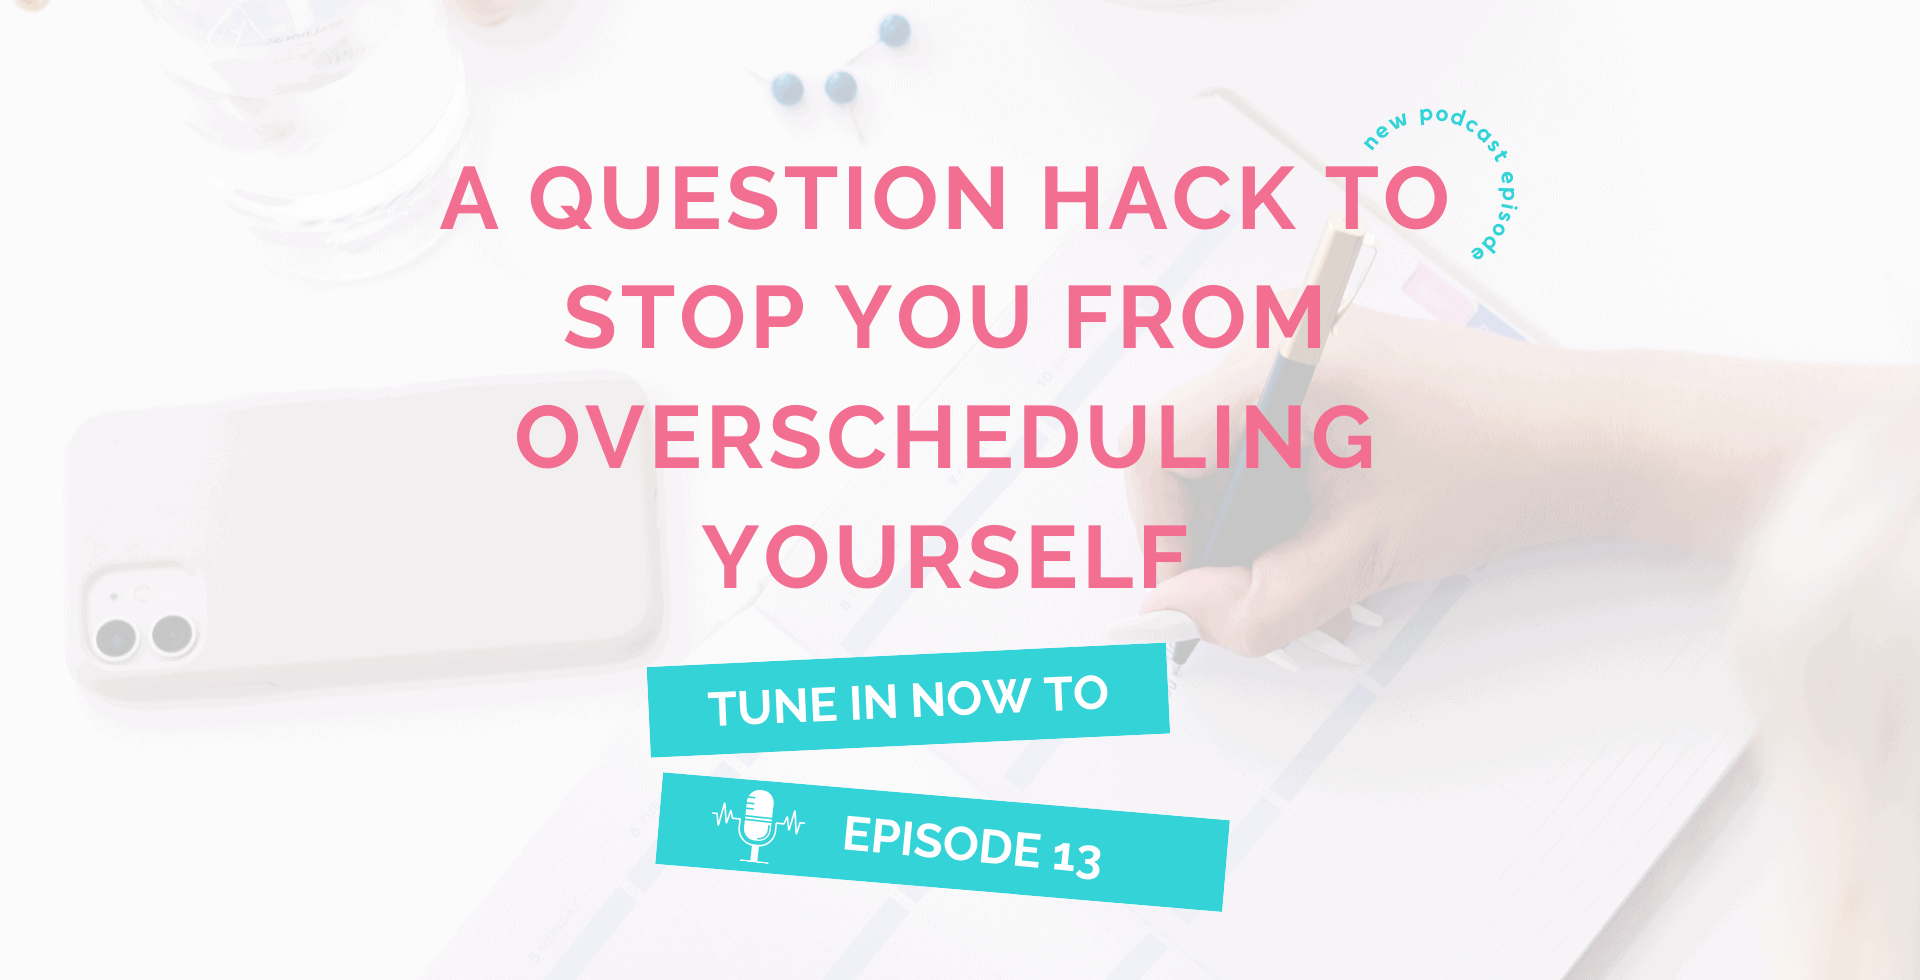 A Question Hack to Stop You From Overscheduling Yourself